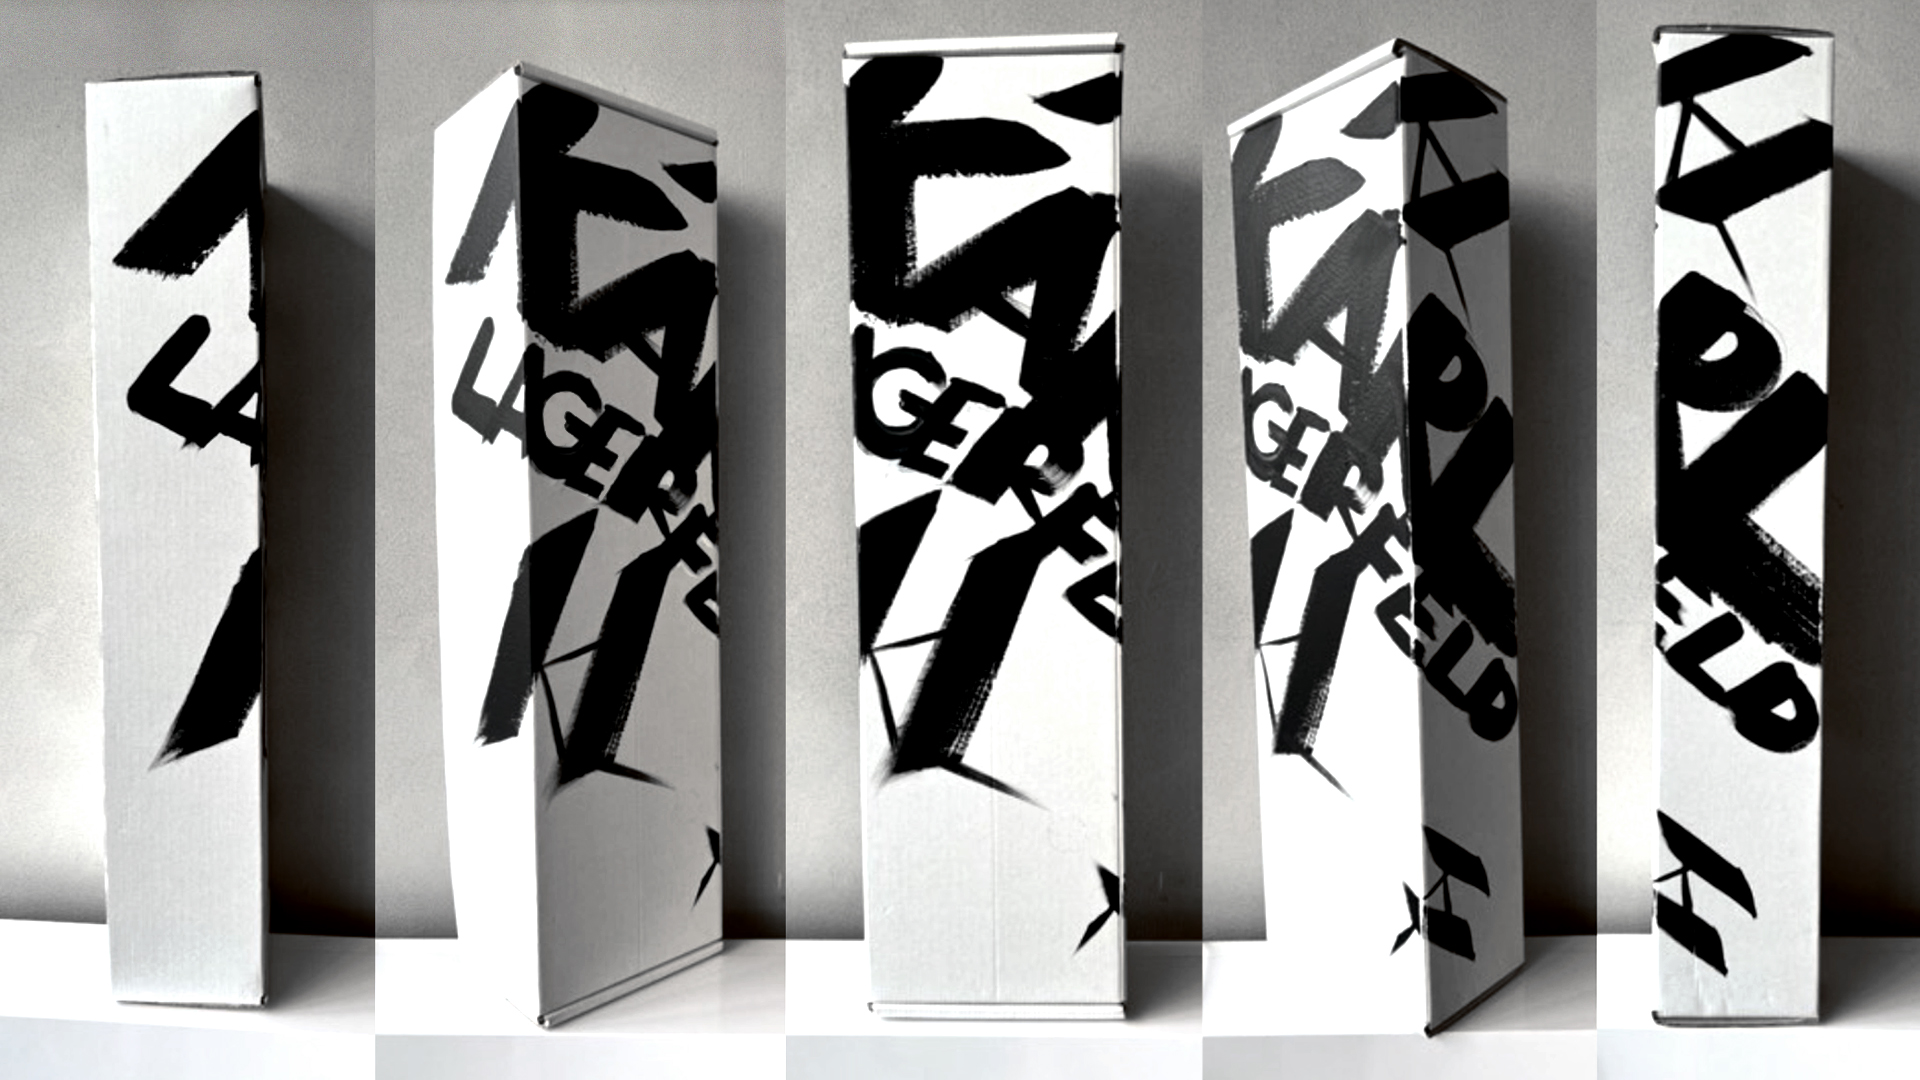 Black and White painted special edition gift boxes for Karl Lagerfeld skateboards